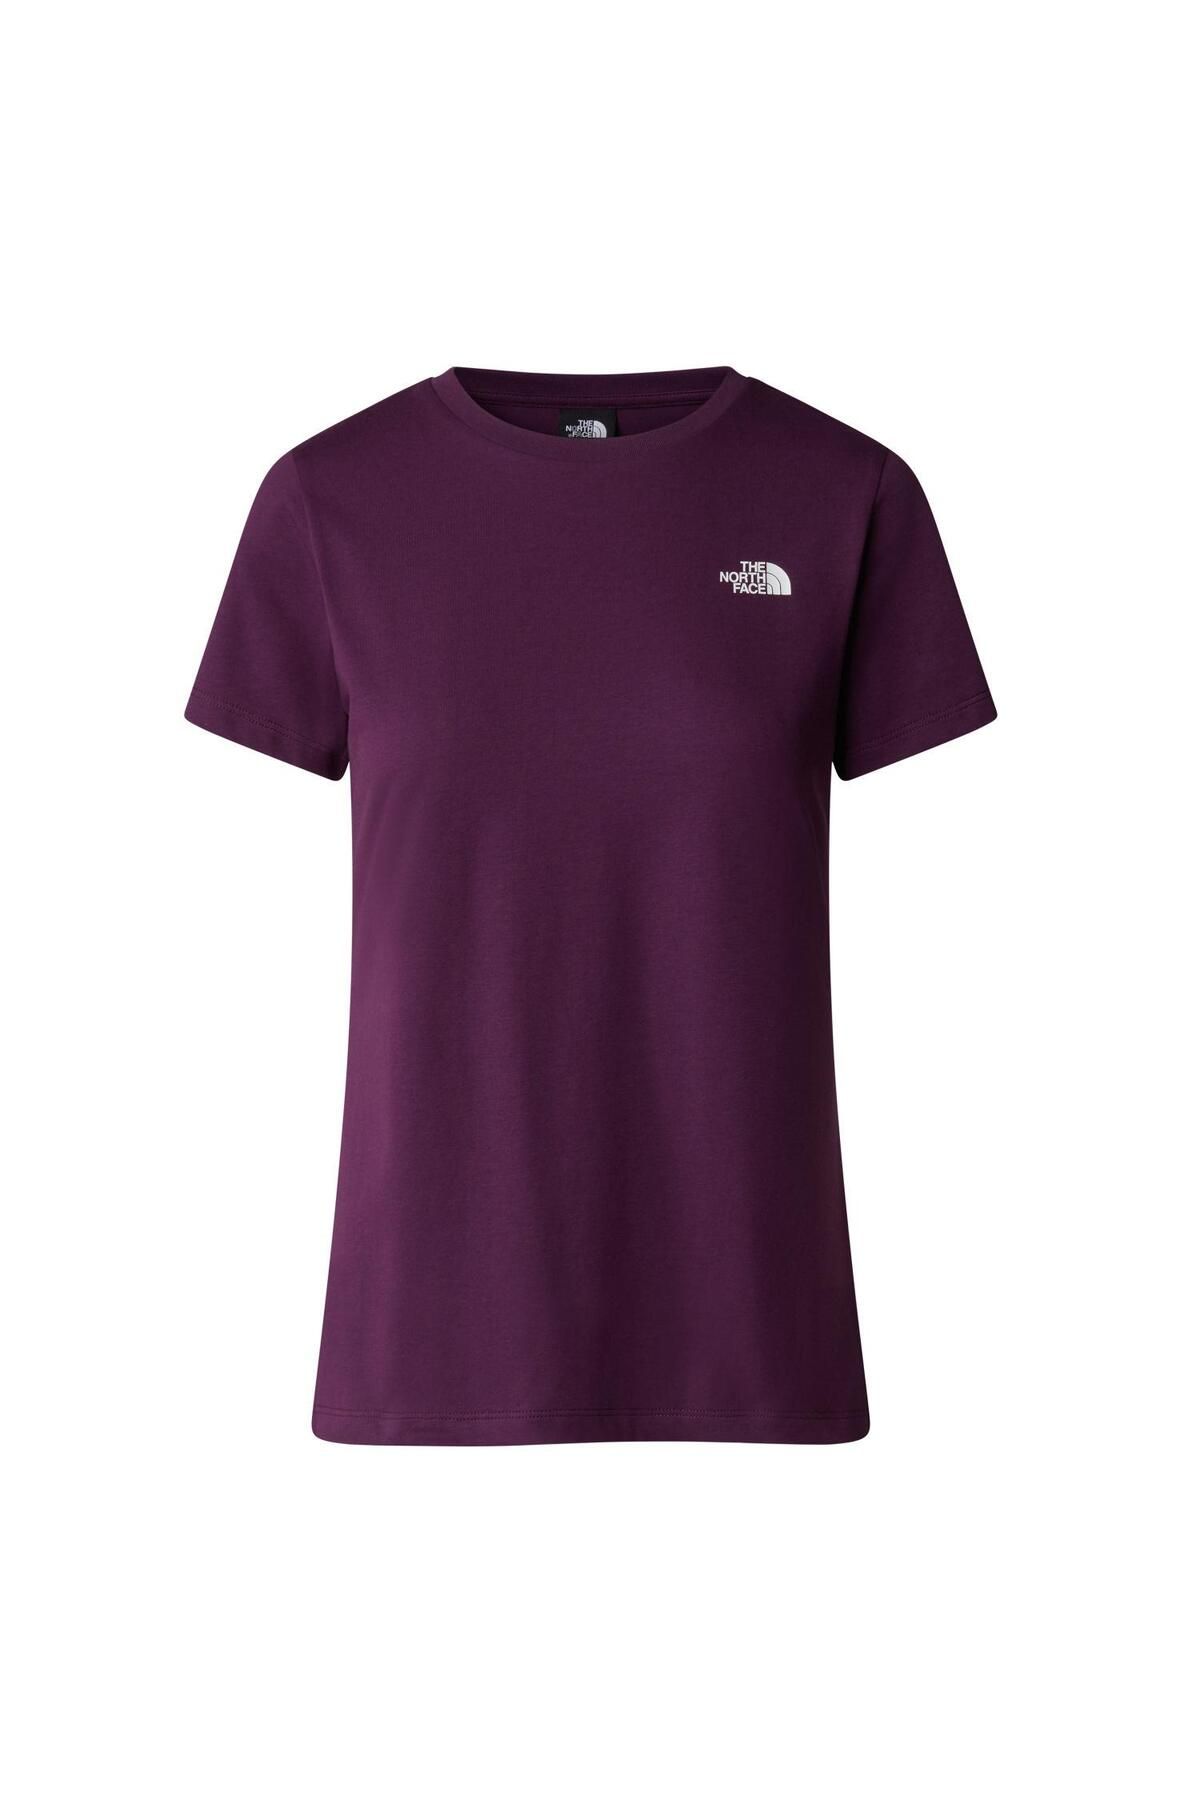 The North Face W S/S SIMPLE DOME SLIM TEE  T-Shirt NF0A87NHV6V1 Siyah-Mor-M